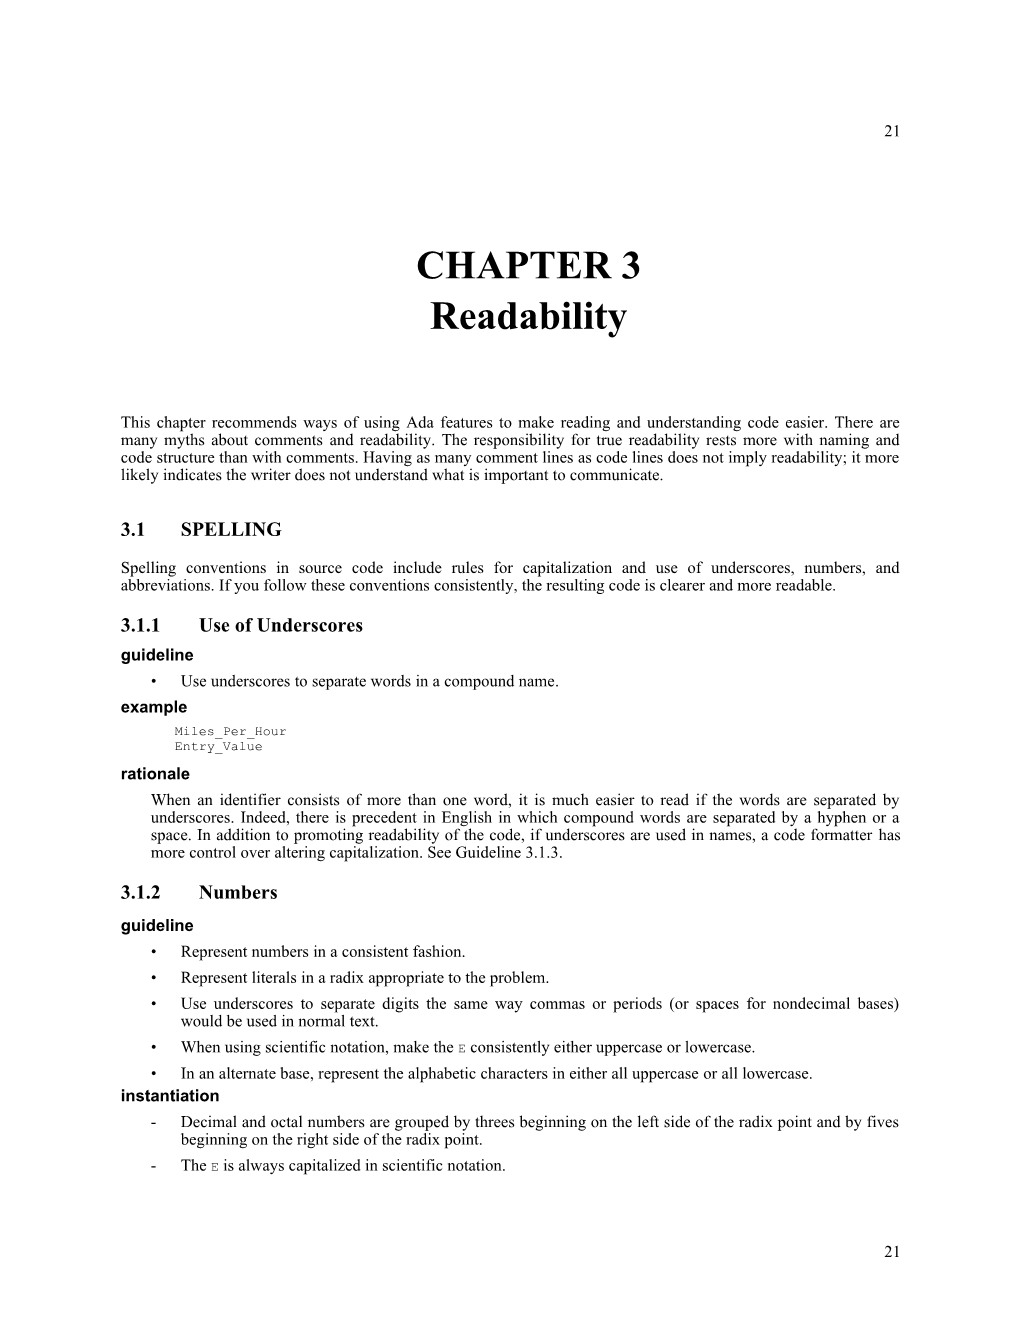 This Chapter Recommends Ways of Using Ada Features to Make Reading and Understanding Code